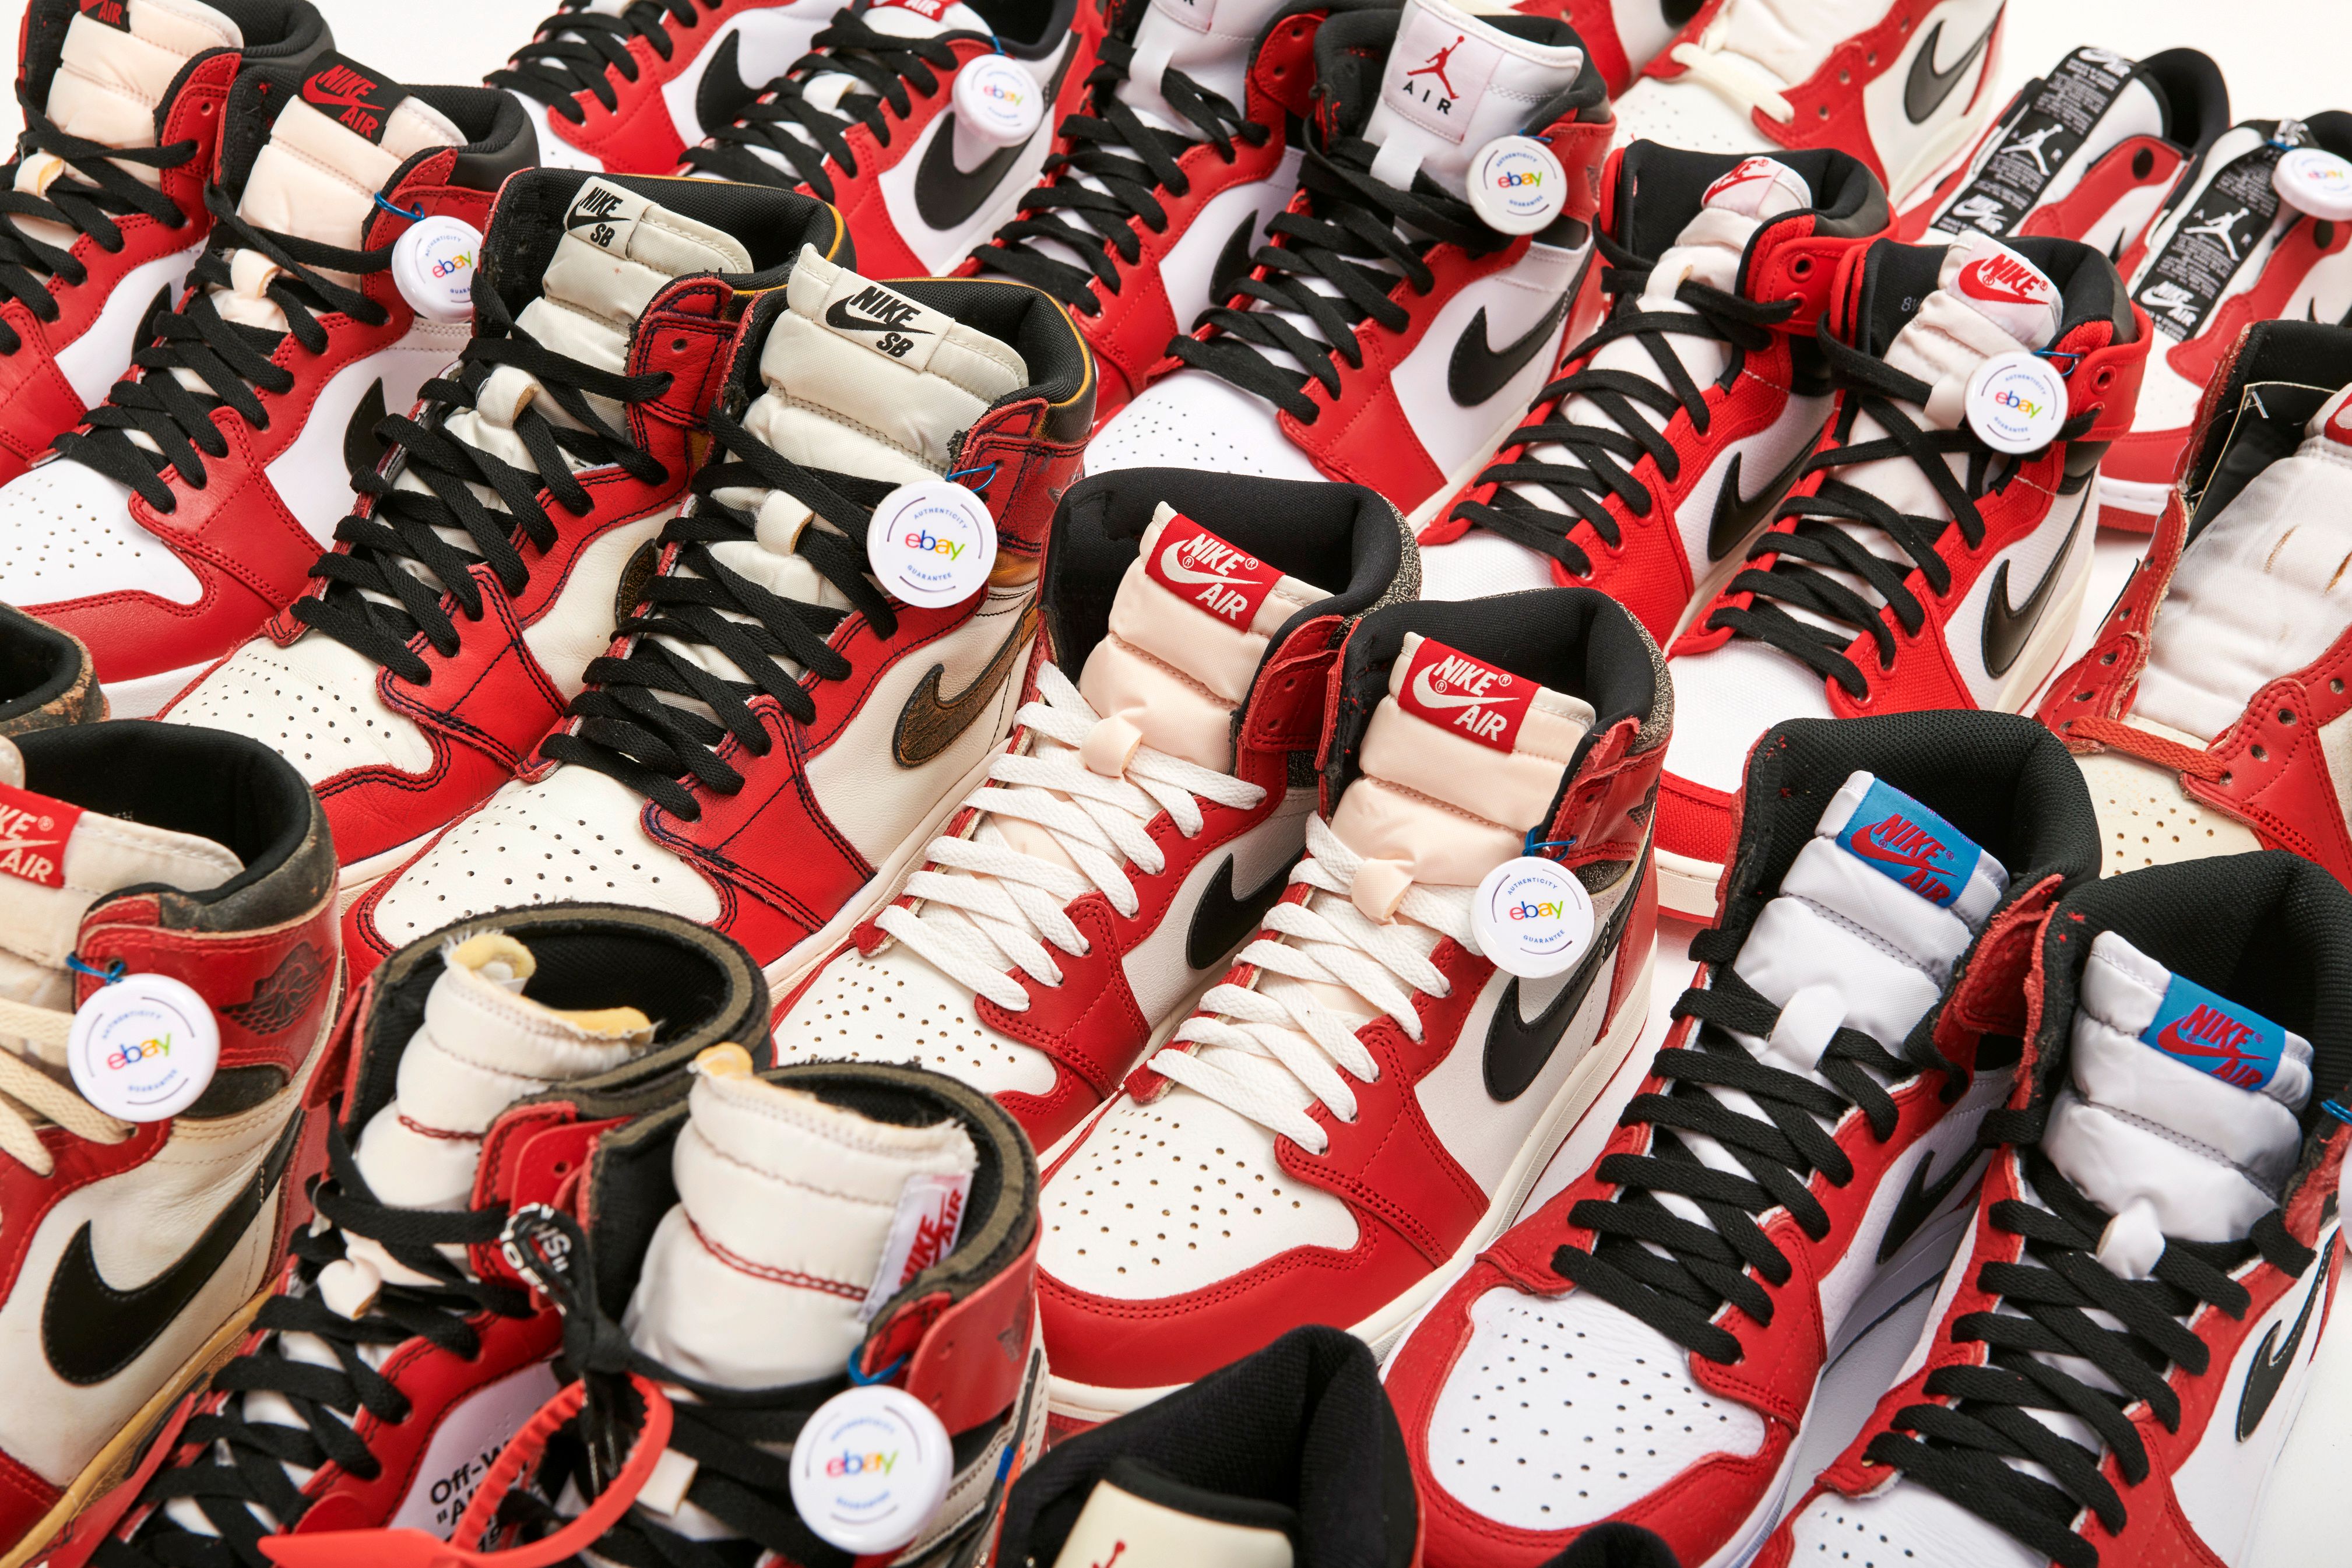 s authentication process gains traction with sneakerheads